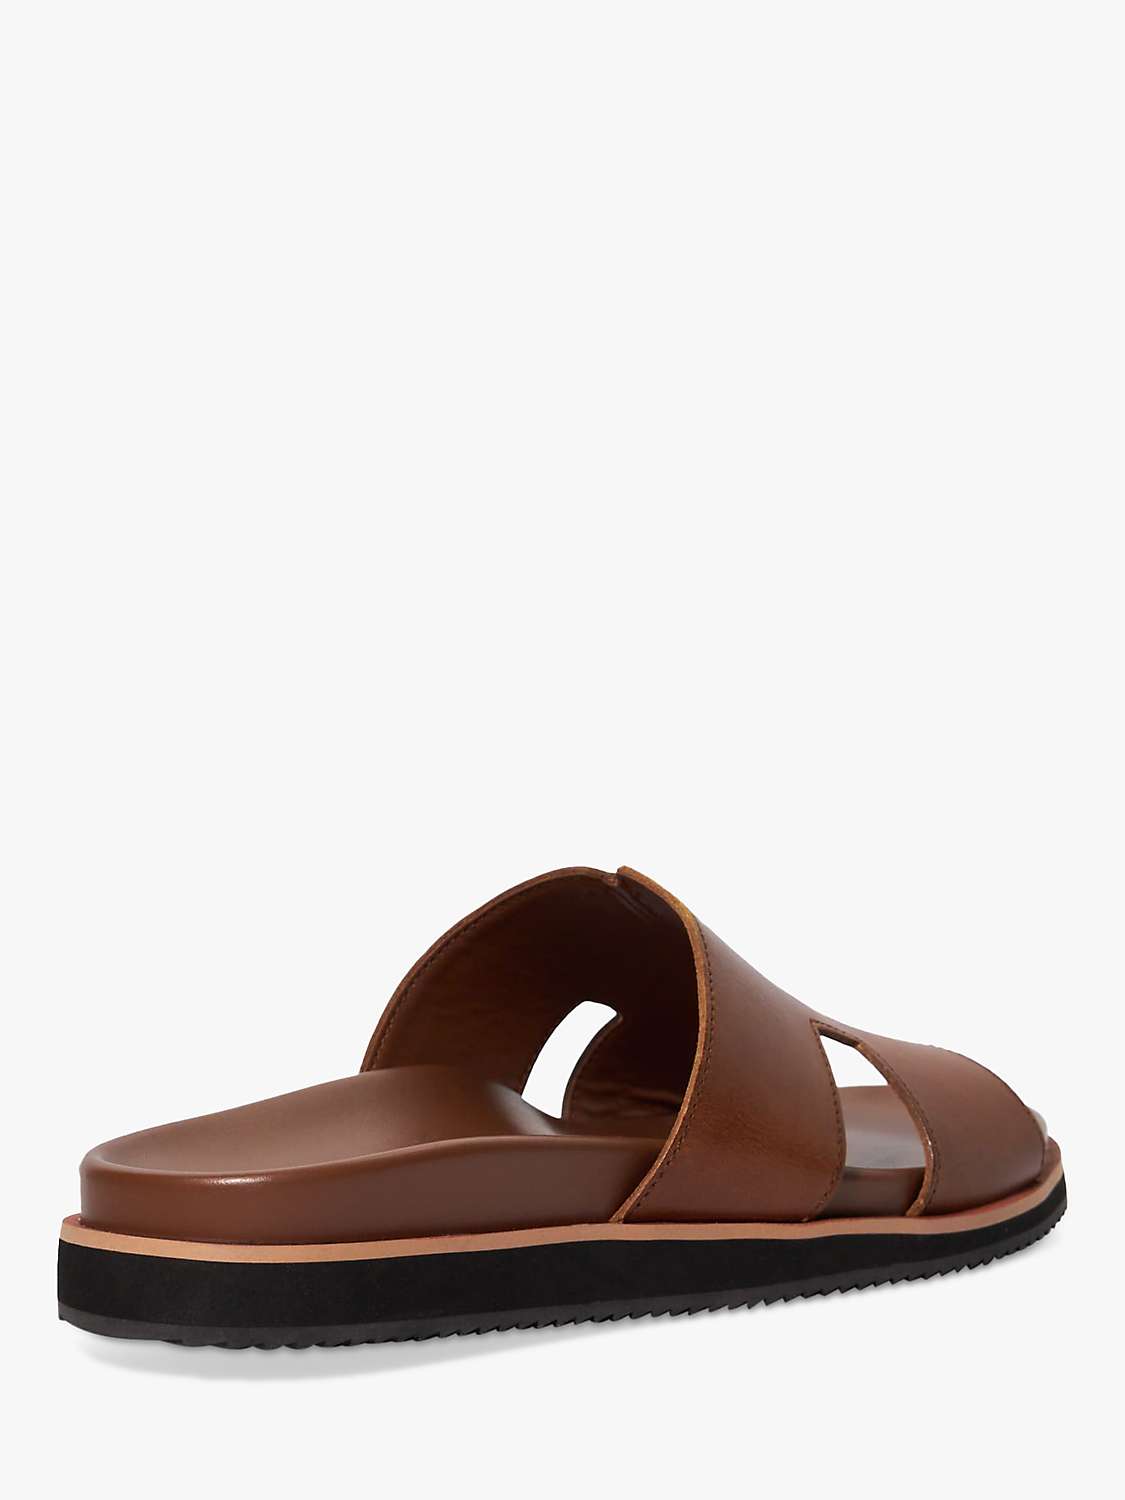 Buy Dune Insight Chunky Sole Sandals, Tan Online at johnlewis.com